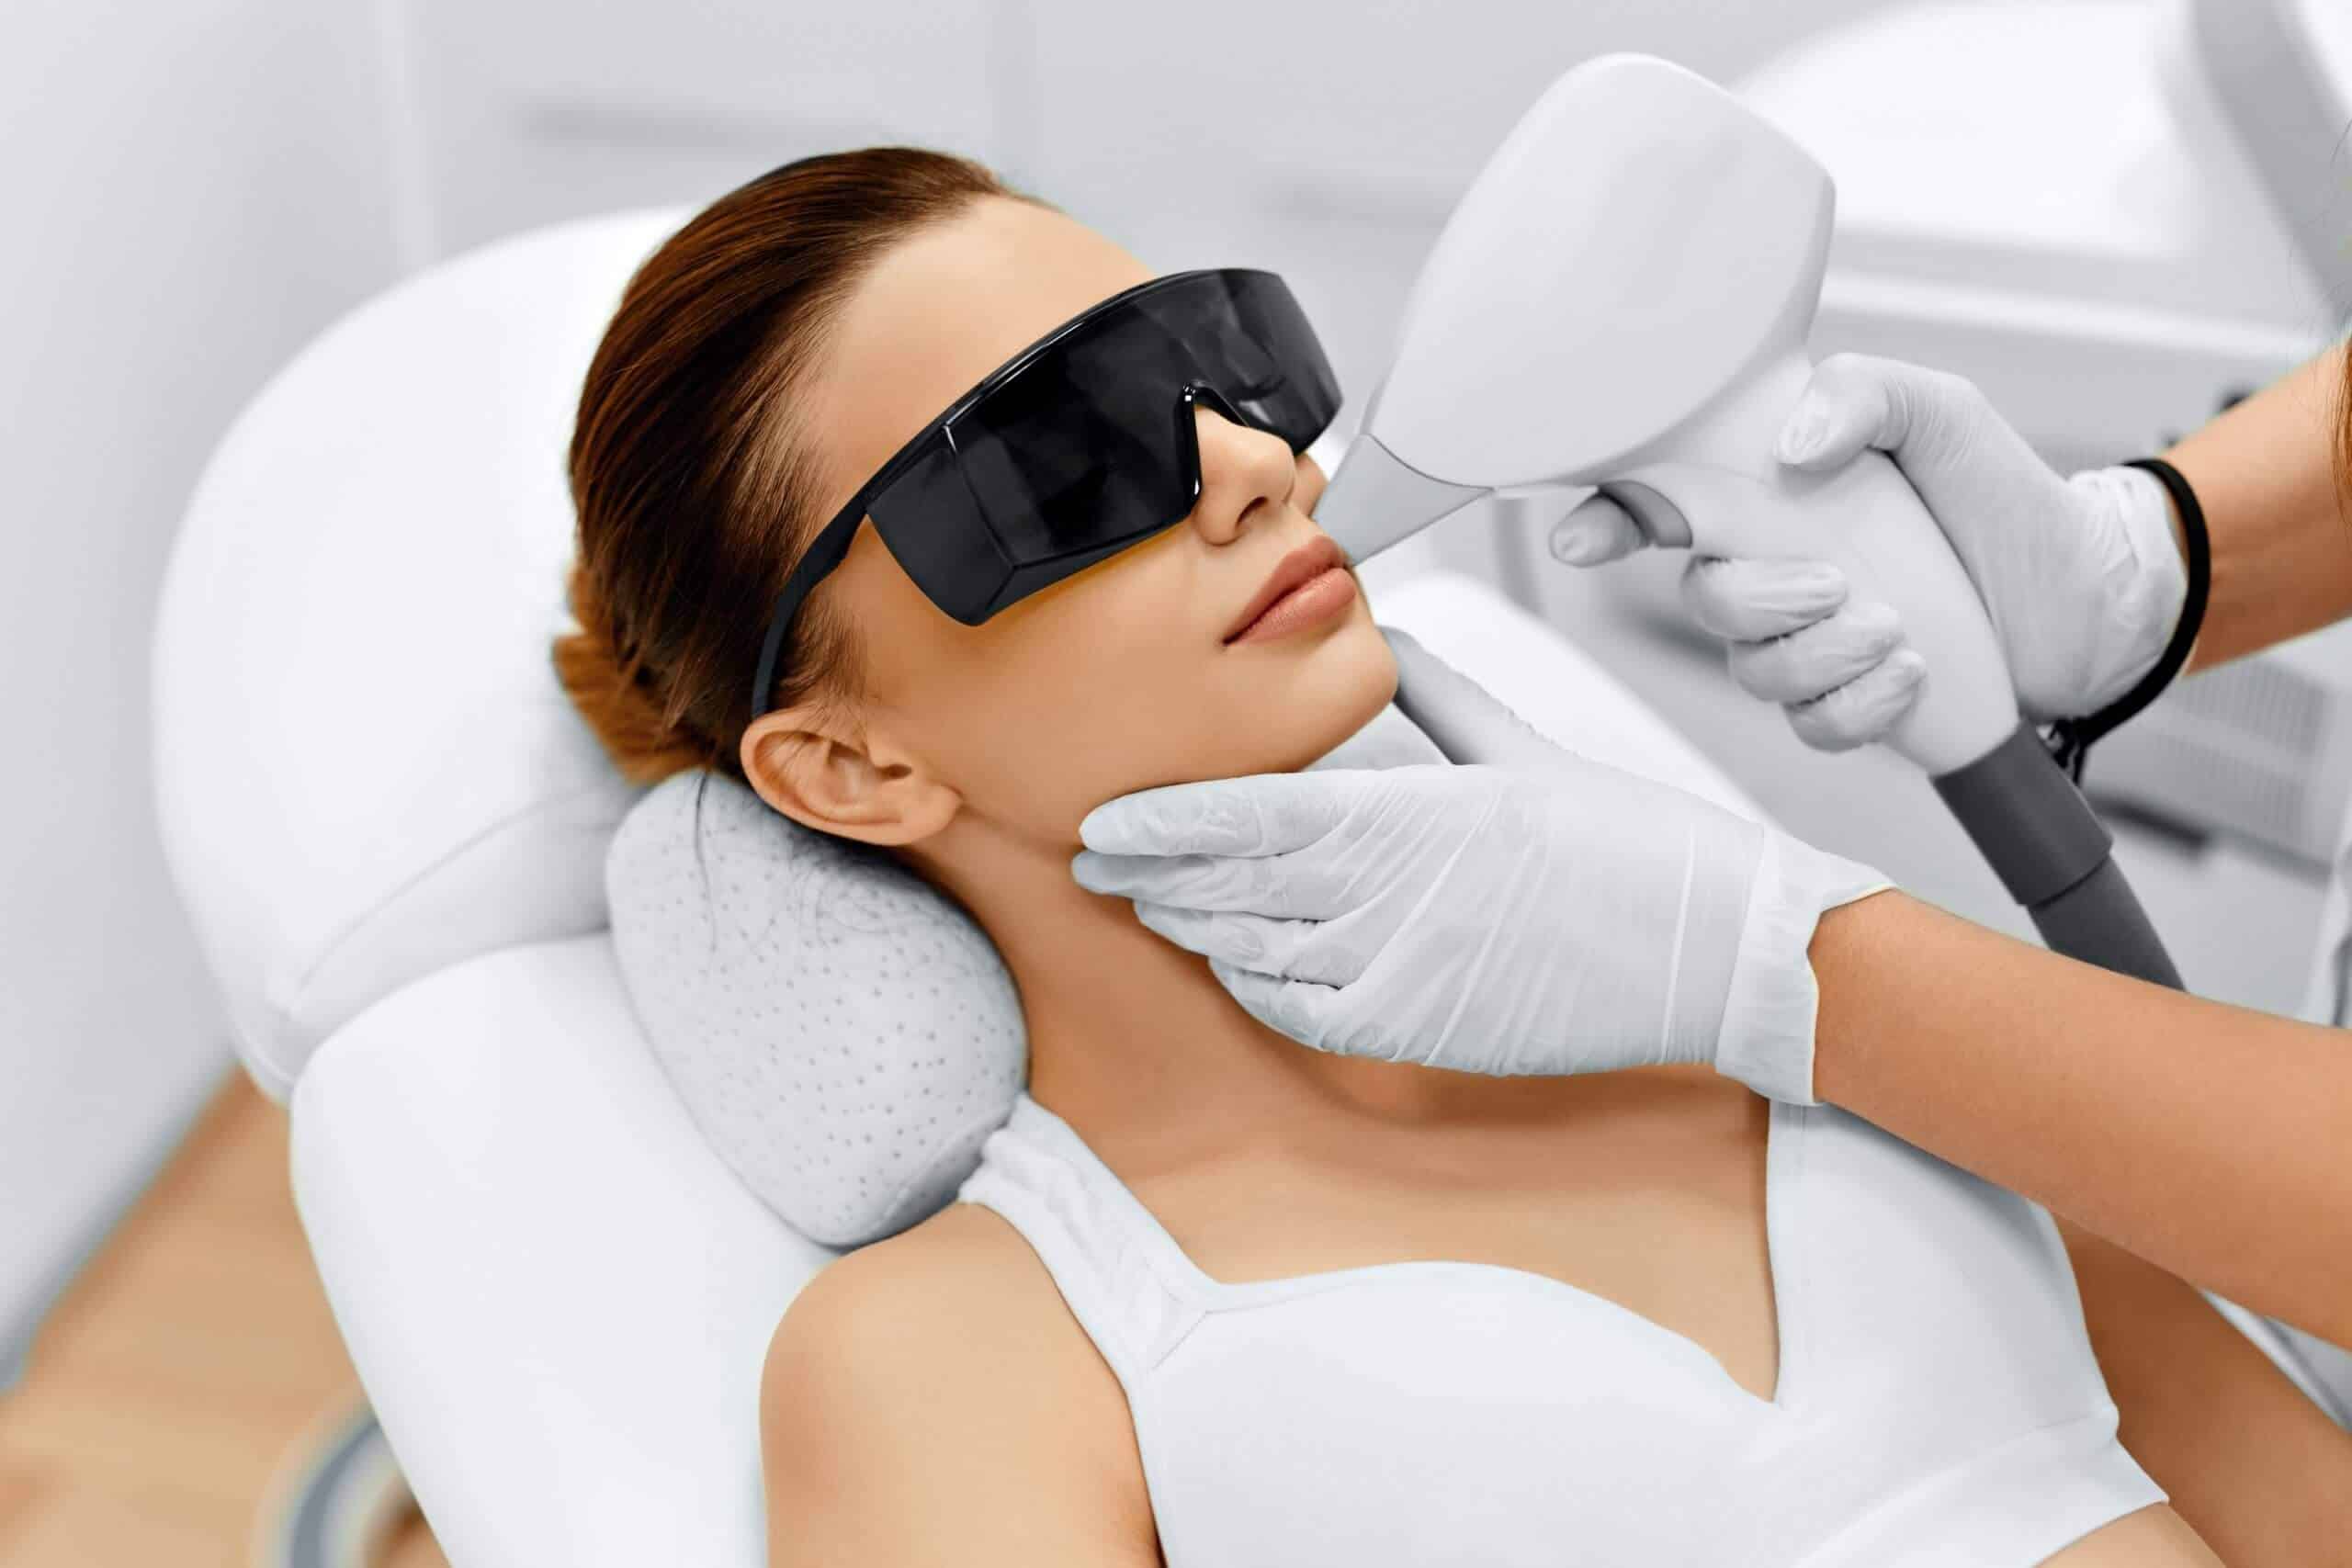 Morpheus8 Body How Radiofrequency Microneedling Can Transform Your Body